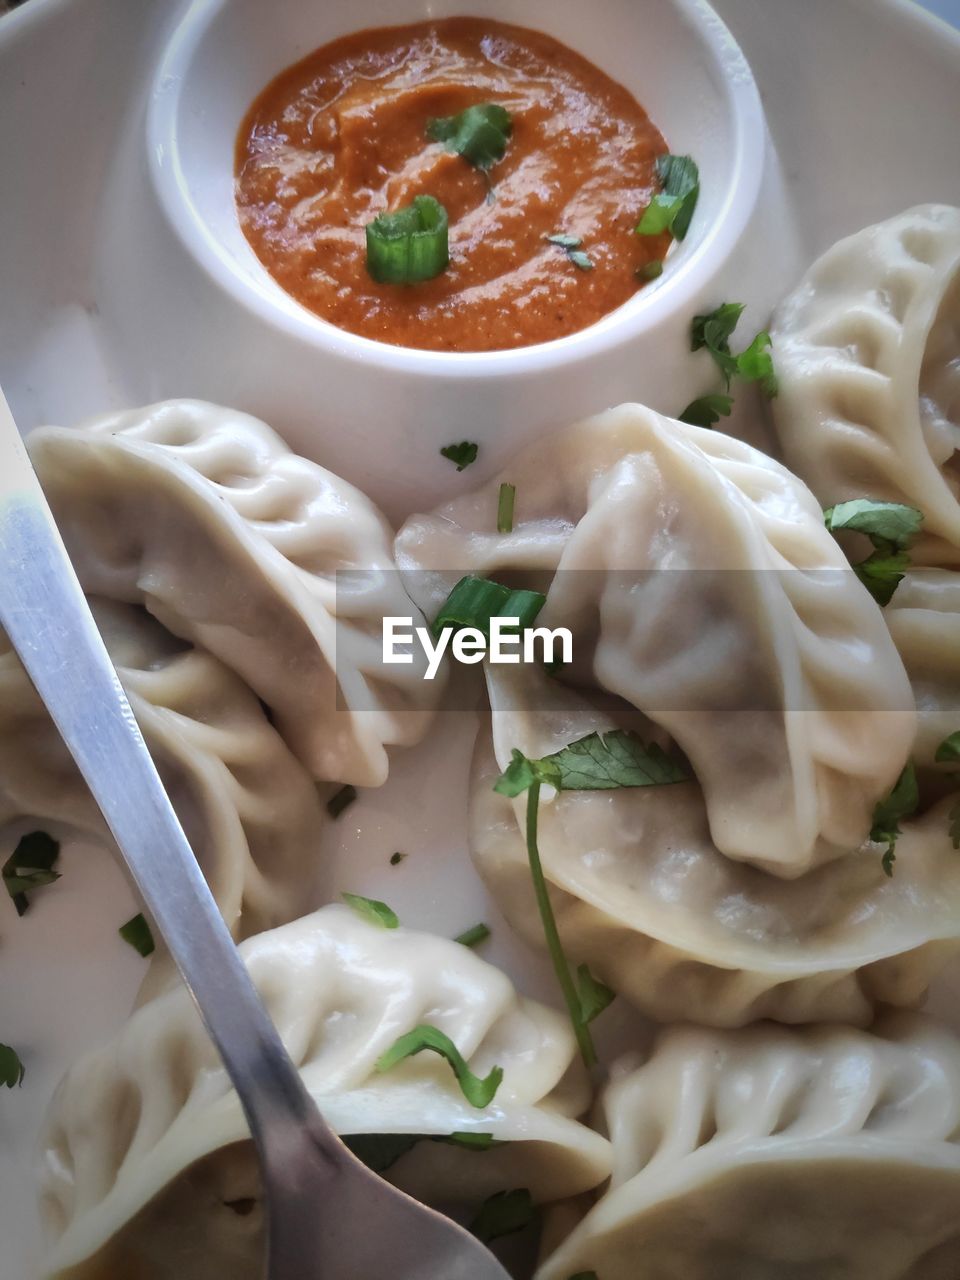 food, food and drink, wonton, dumpling, dish, healthy eating, cuisine, mandu, manti, freshness, vegetable, wellbeing, asian food, chinese food, meal, no people, bowl, indoors, buuz, produce, savory food, pelmeni, khinkali, herb, sauce, soup, close-up, kitchen utensil, appetizer, condiment, high angle view